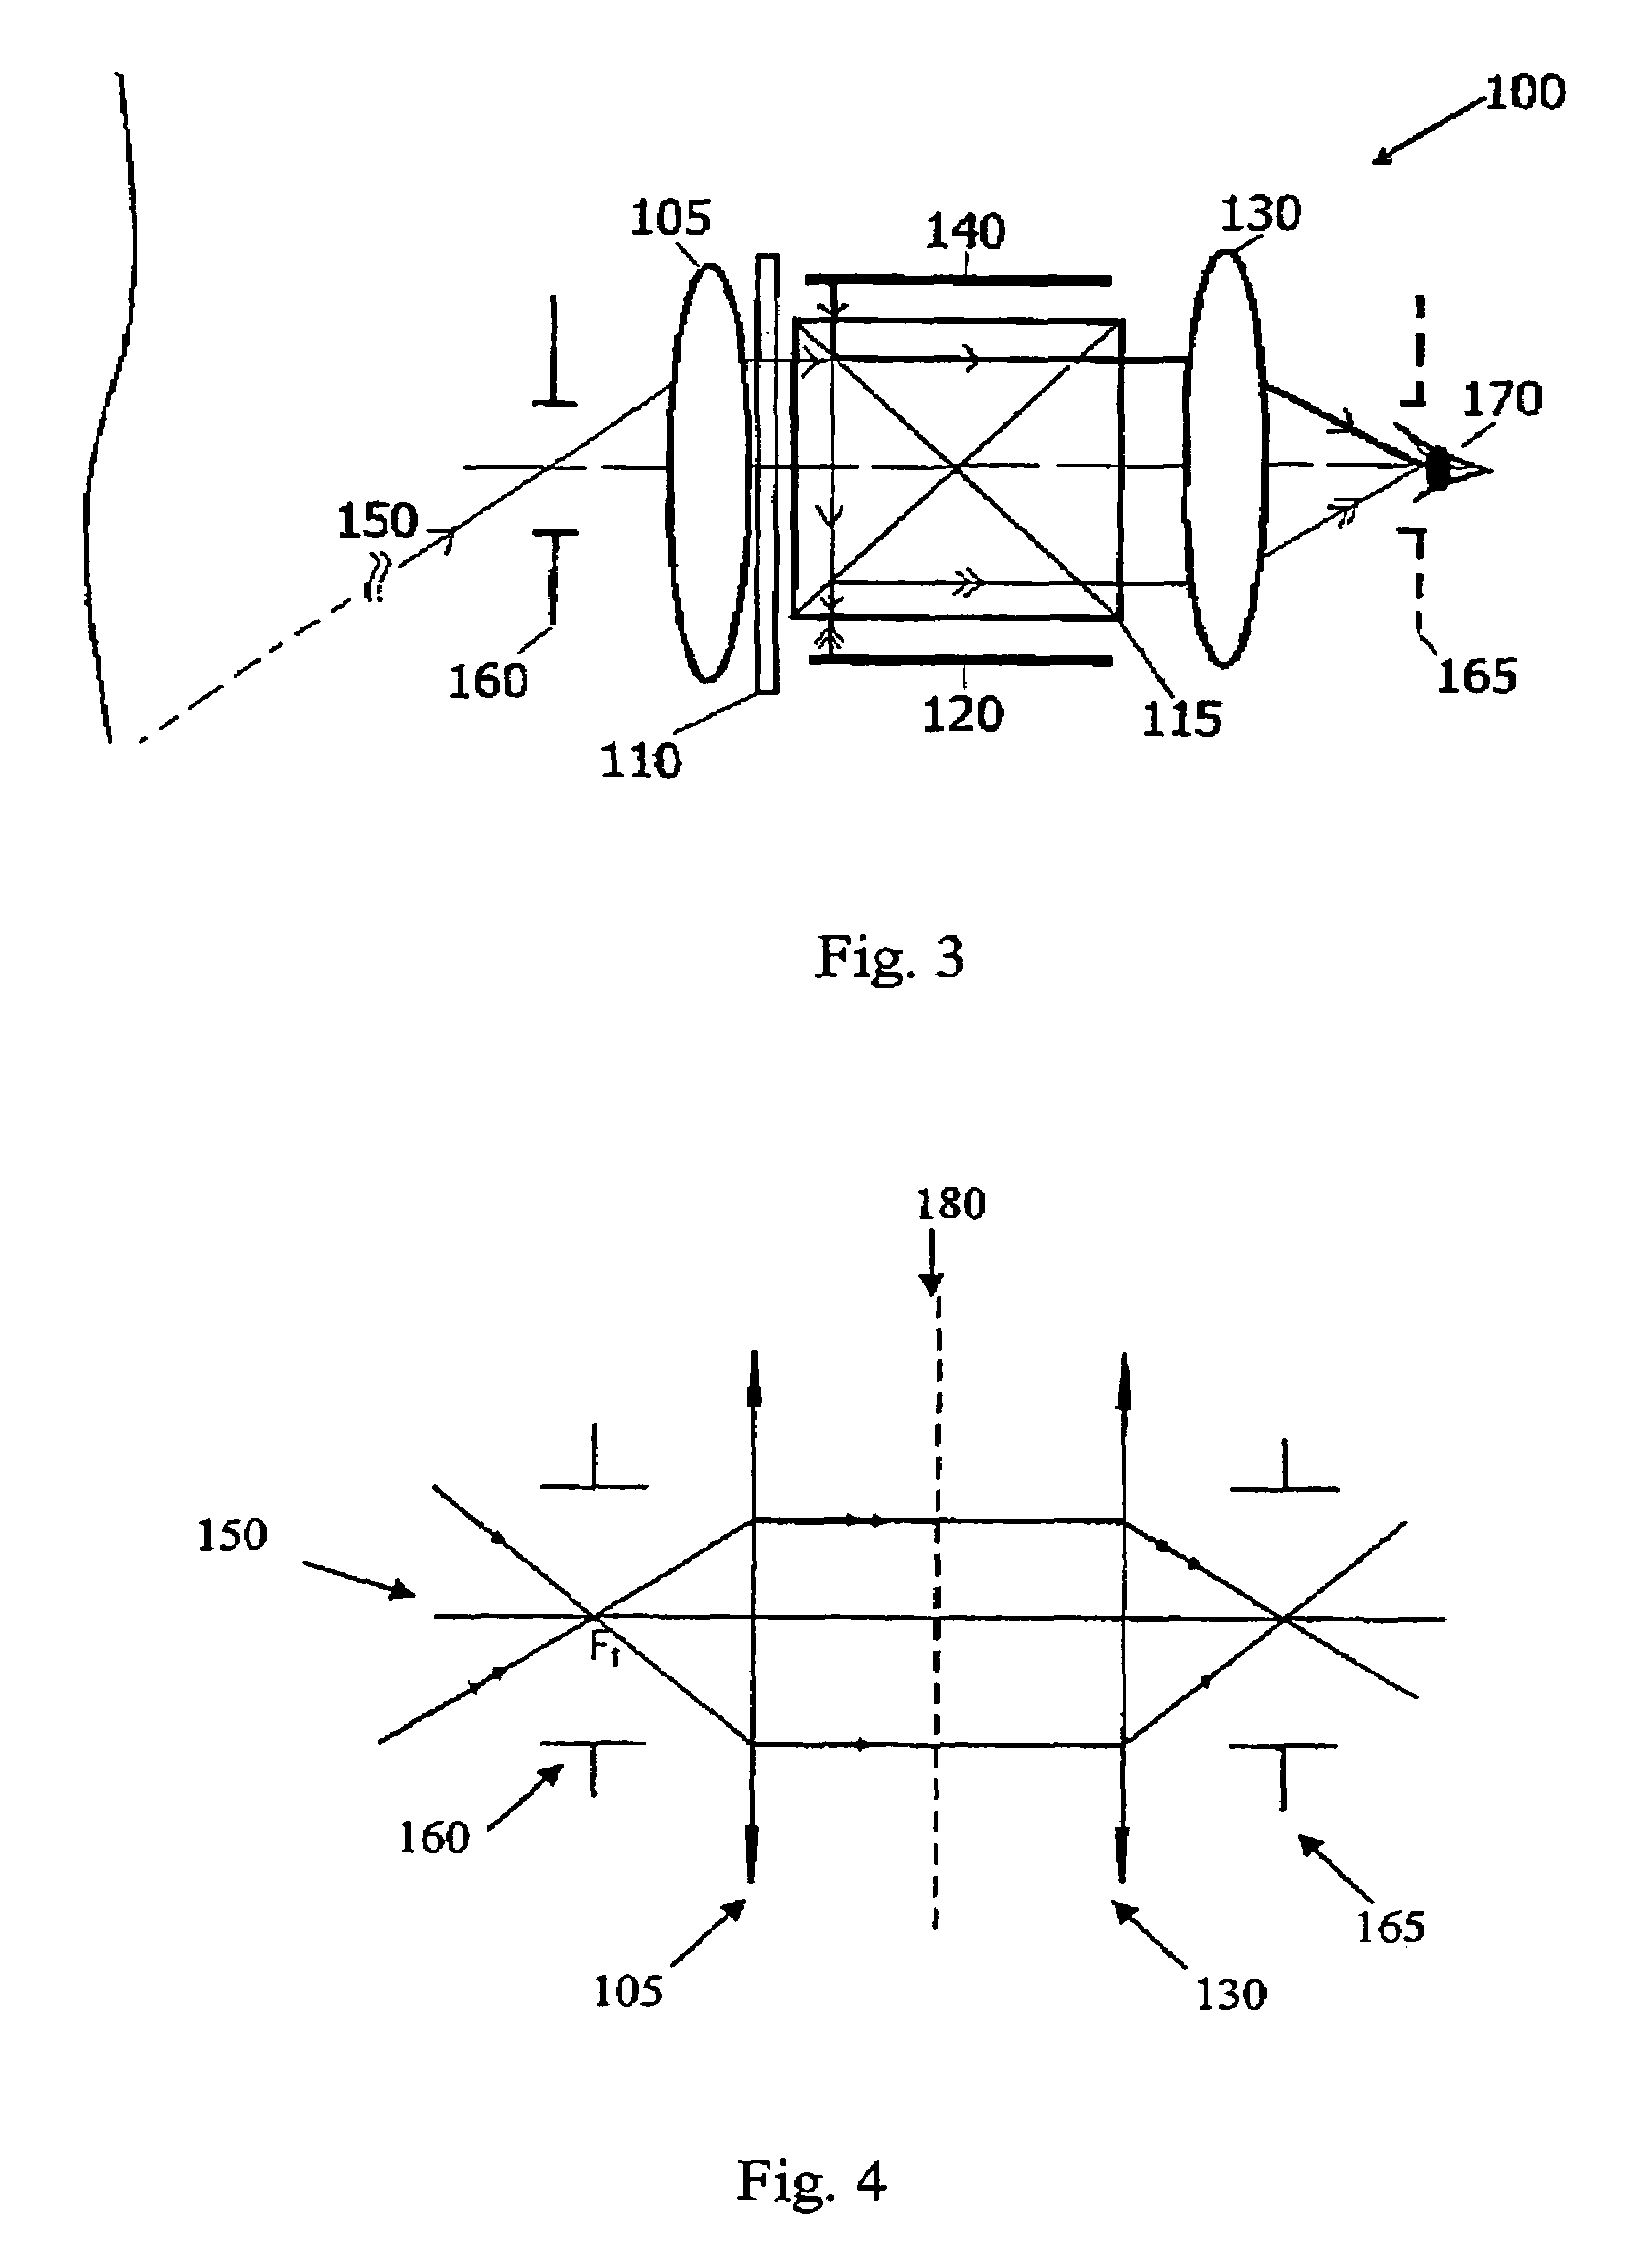 Compact optical see-through head-mounted display with occlusion support